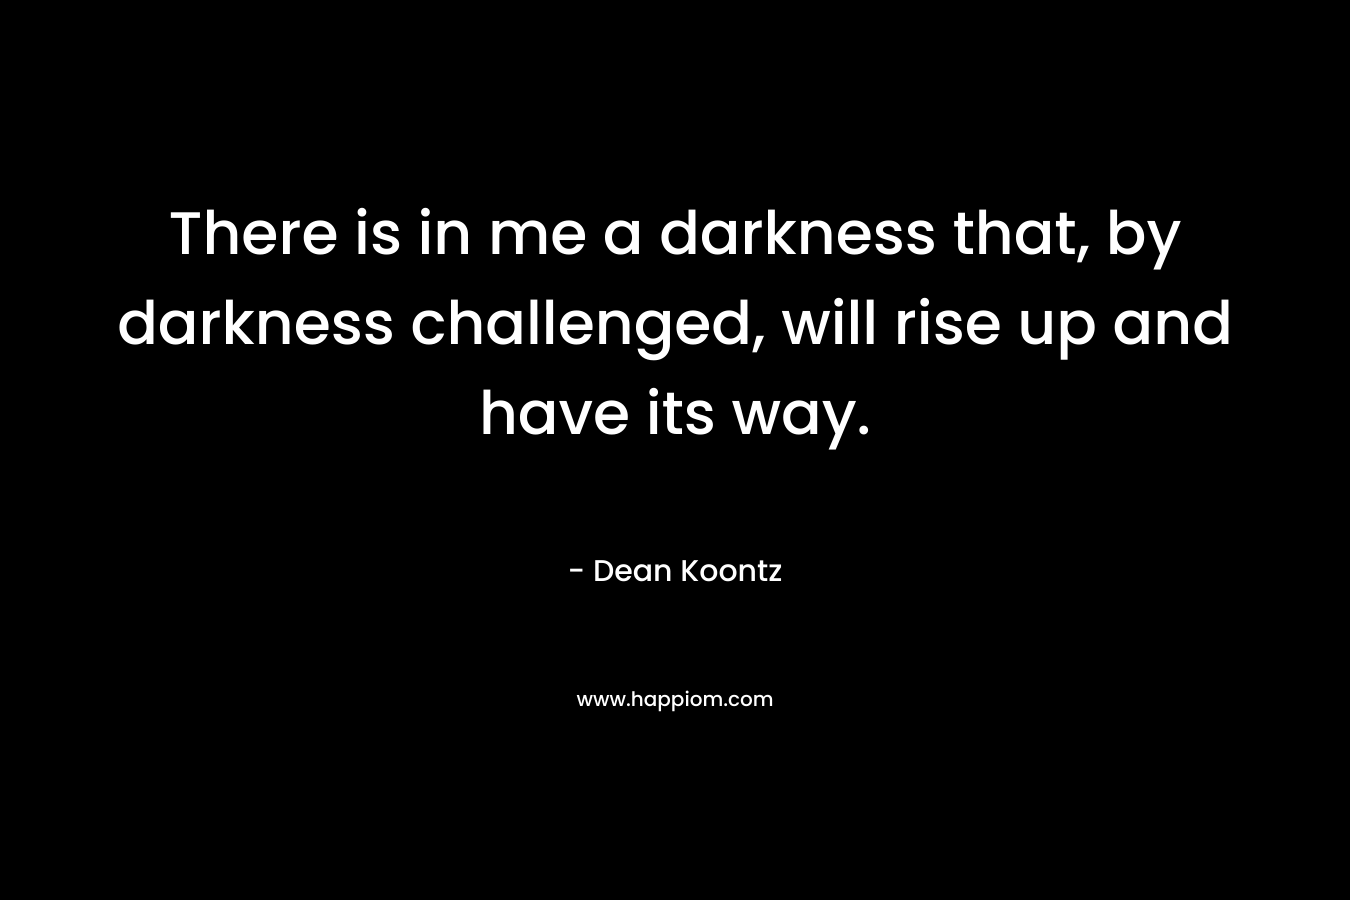 There is in me a darkness that, by darkness challenged, will rise up and have its way.